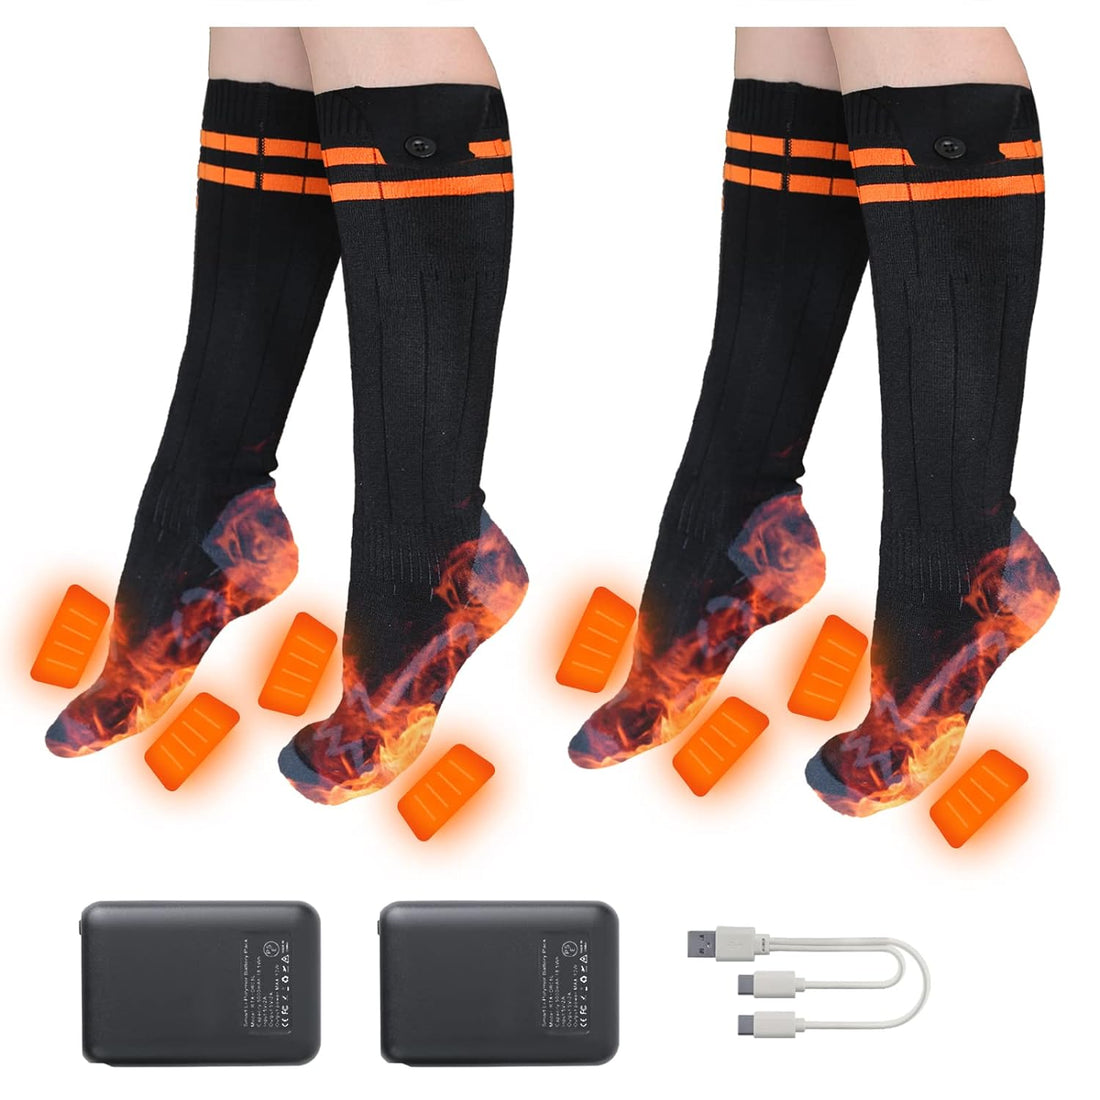 2 Pairs Heated Socks for Men Women, Rechargeable 5000mAh Power Pack Heated Socks with 4 Heating Level, Washable Electric Heated Socks for Hiking, Hunting, Skiing, Winter Activities(M)